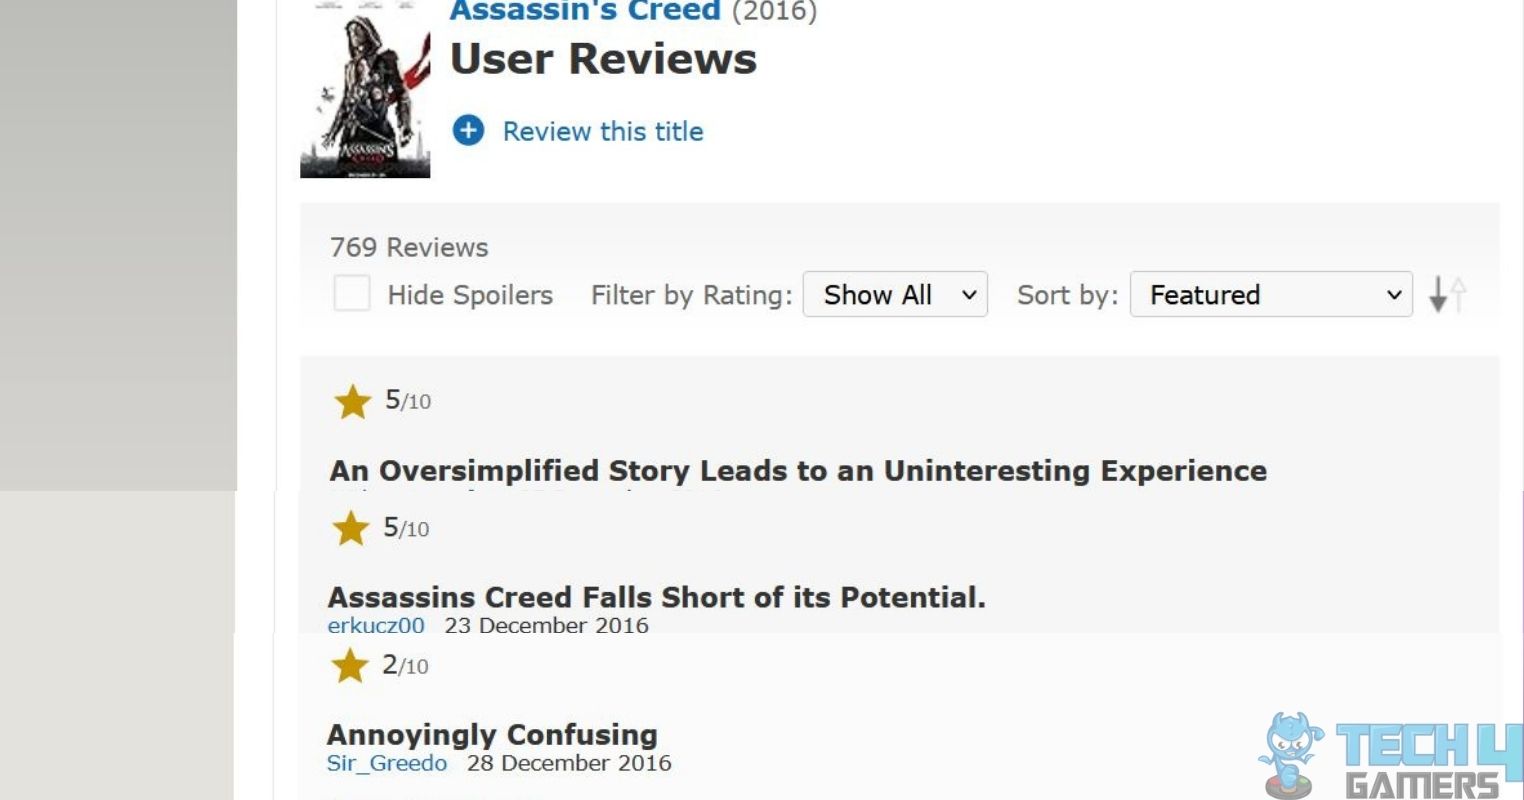 Some Low Rated Reviews On The 2016 Assassin's Creed Movie